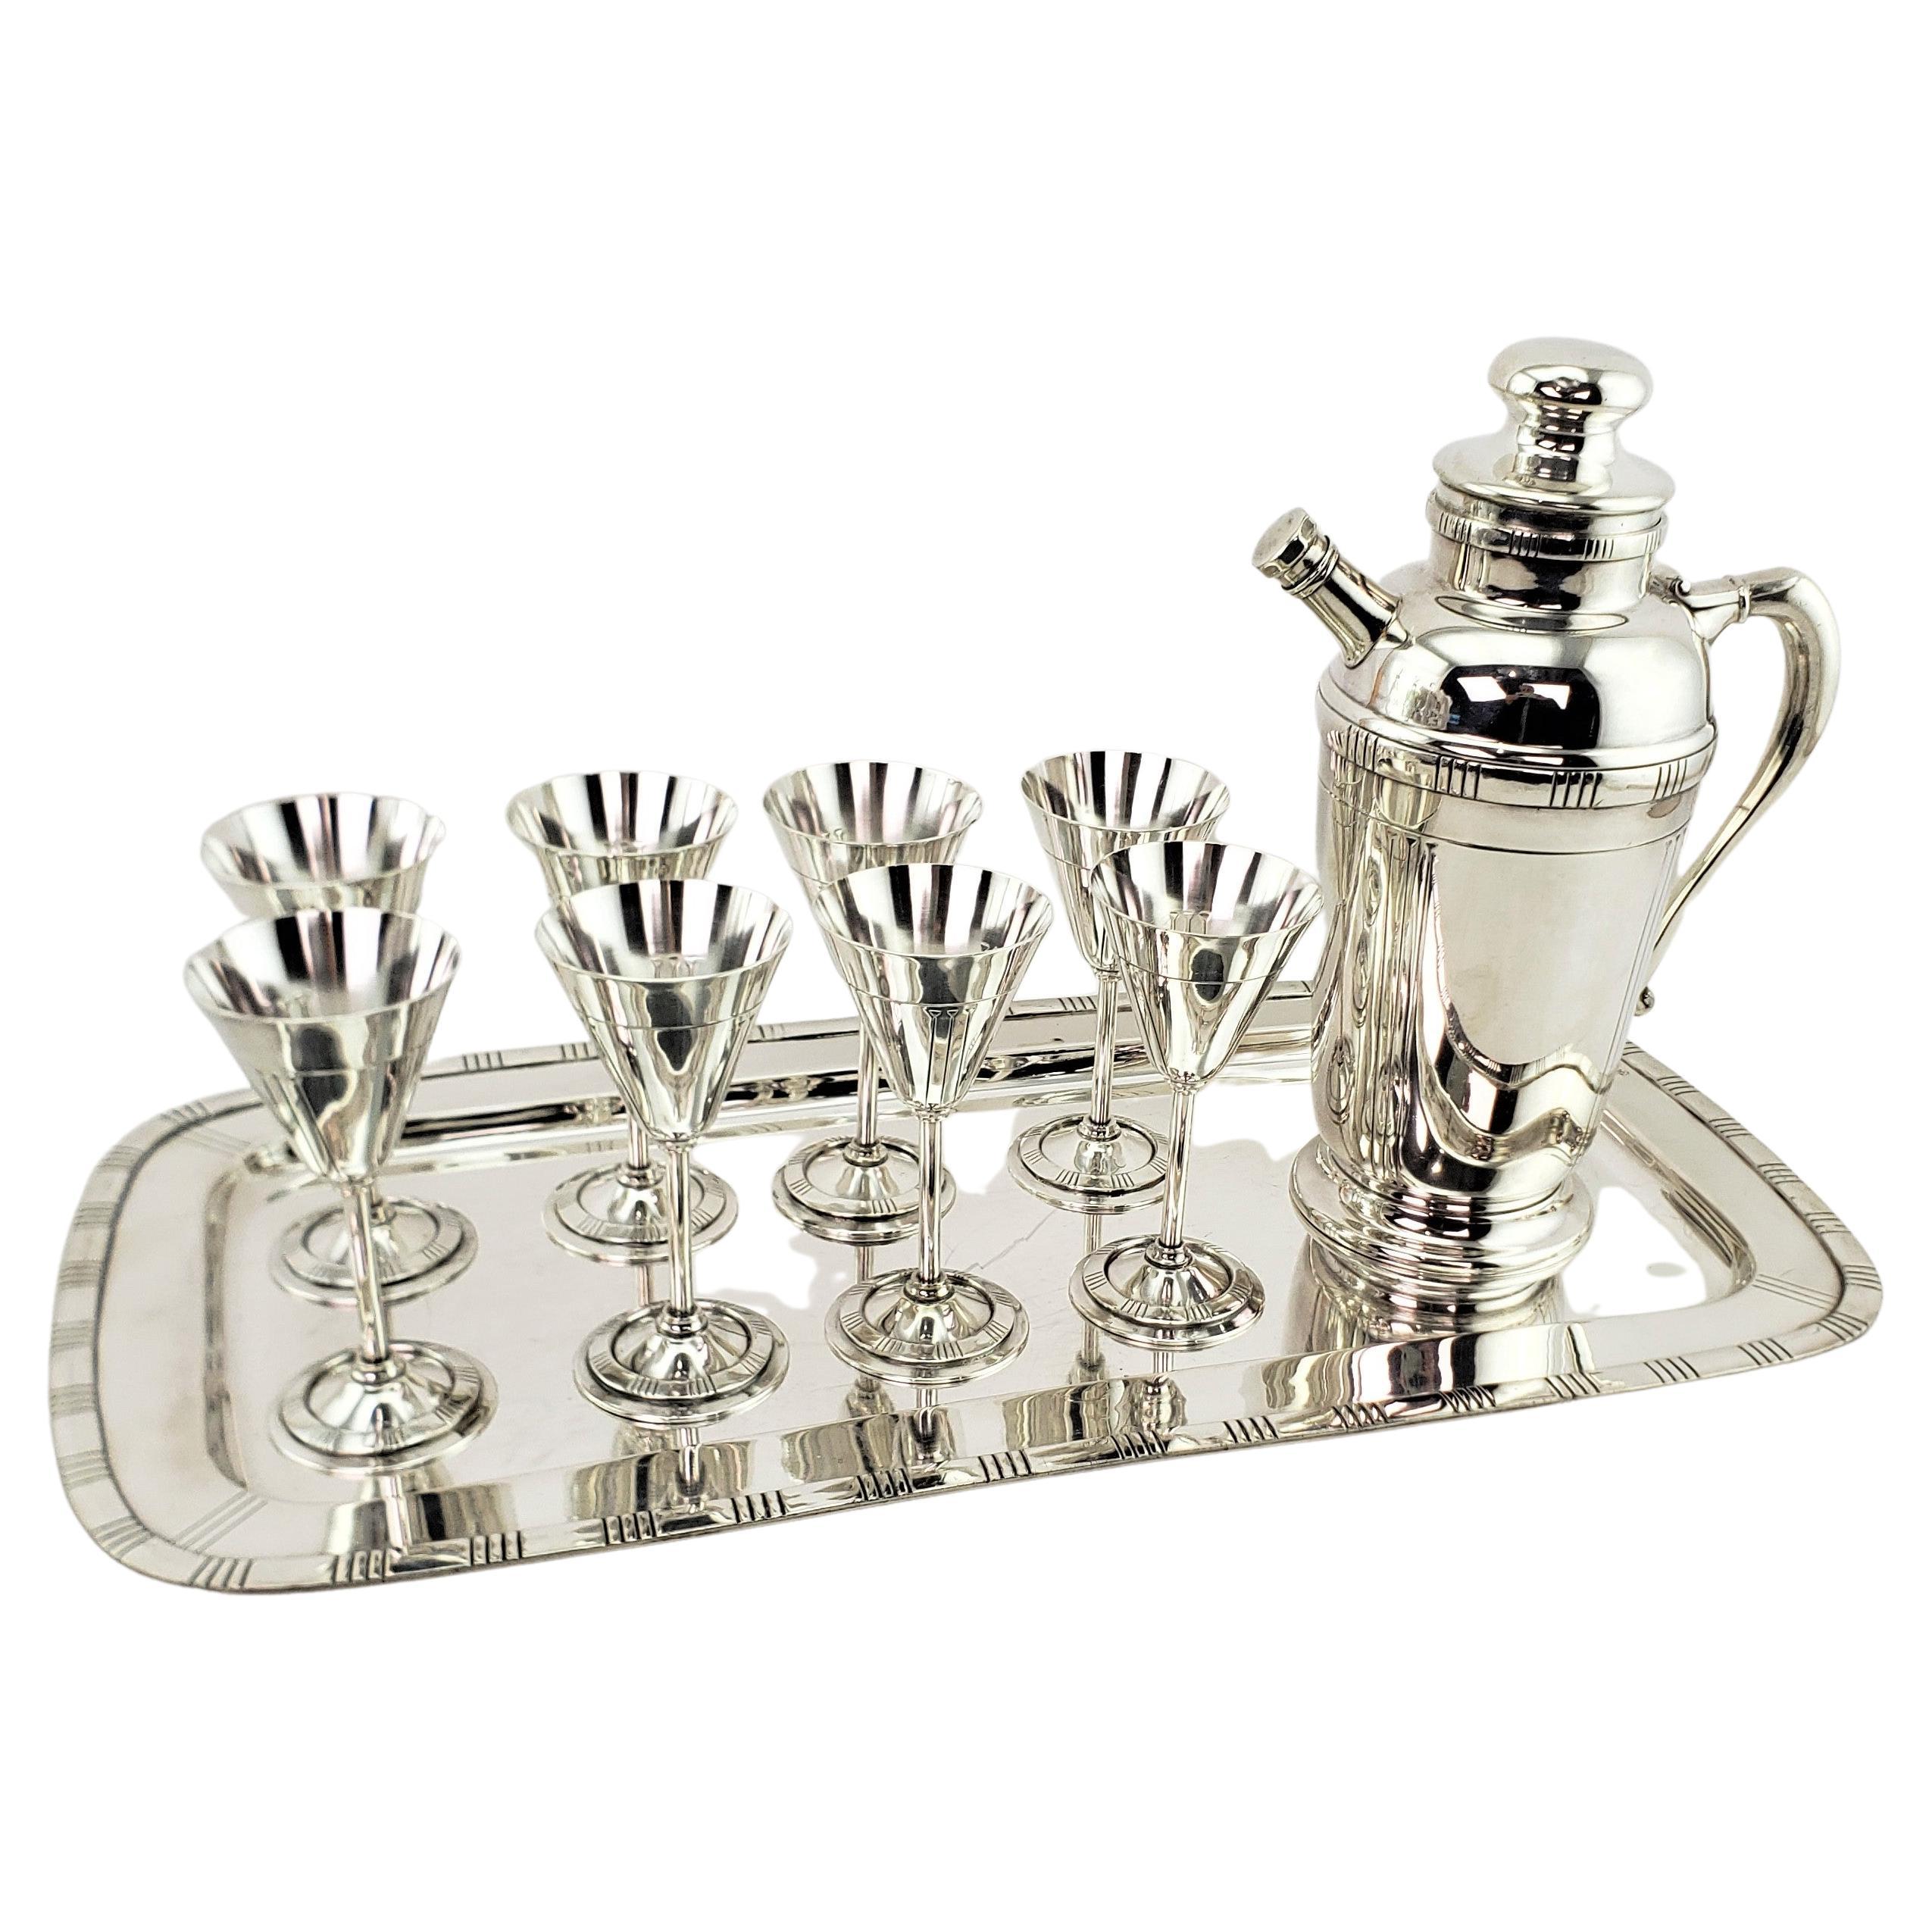 Midcentury Silver Plated Cocktail Set with Tray, Glasses & Shaker Pitcher For Sale